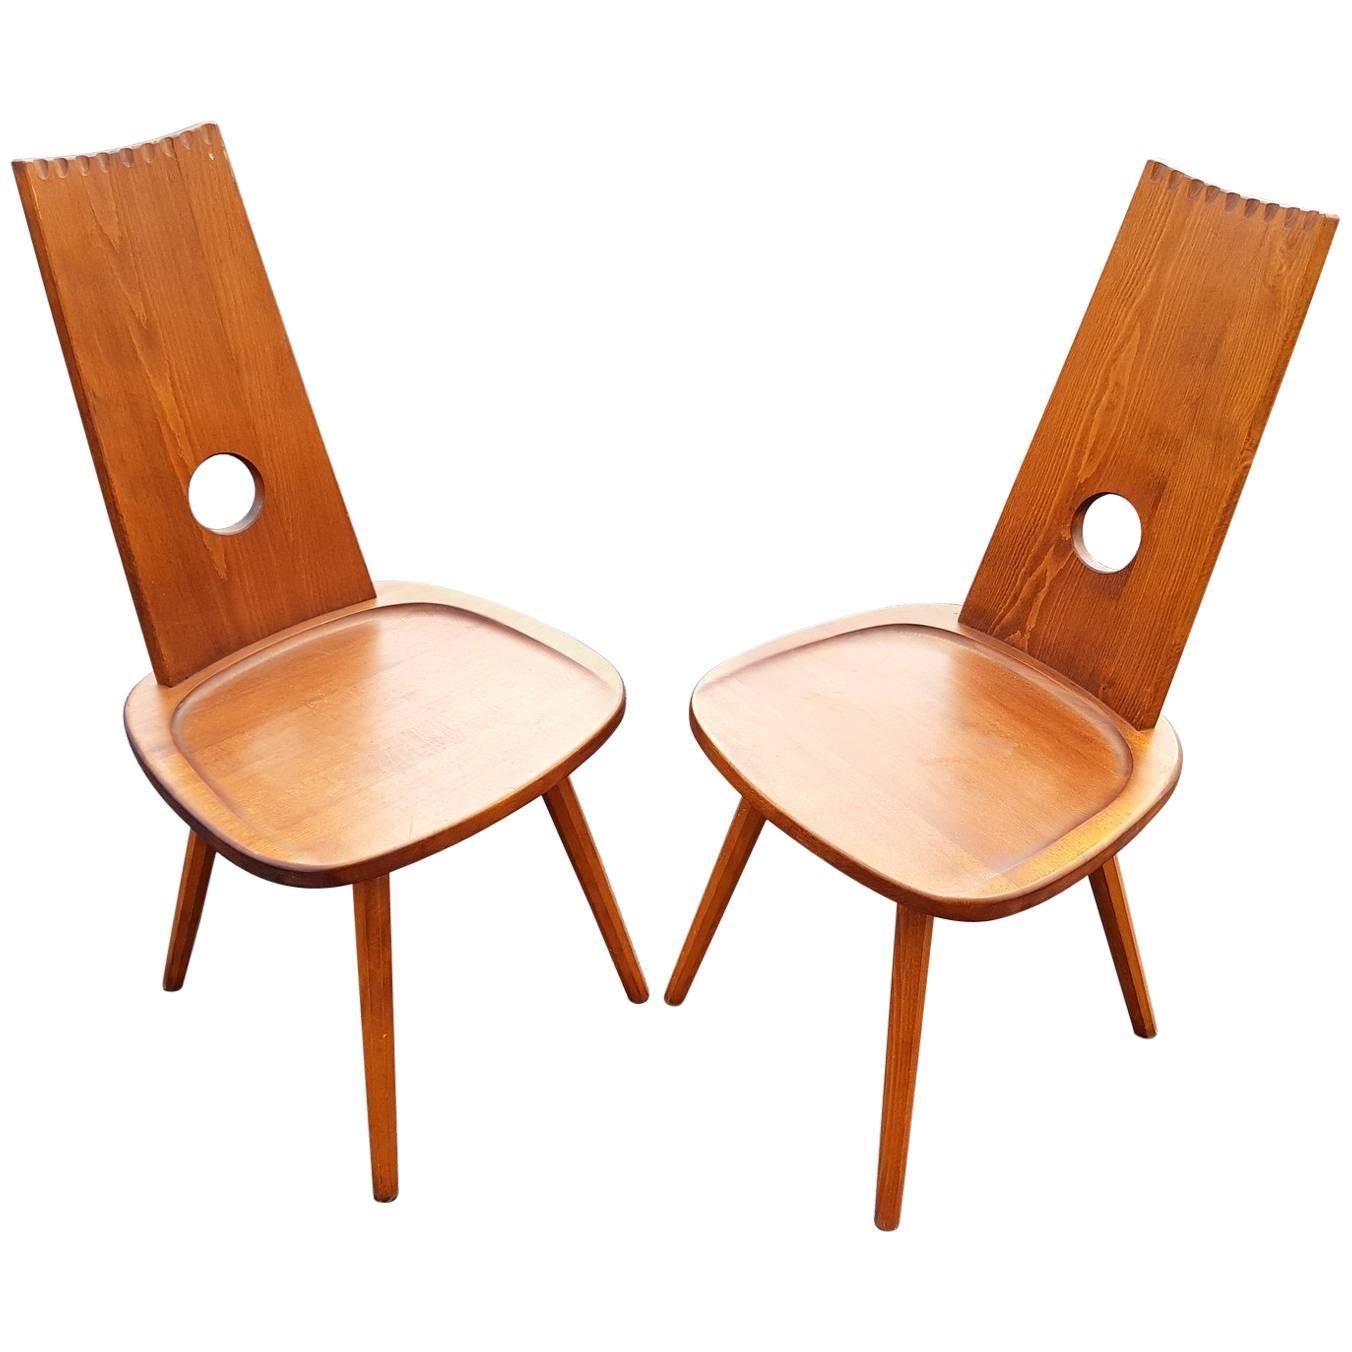 Pair of Brutalist Chairs